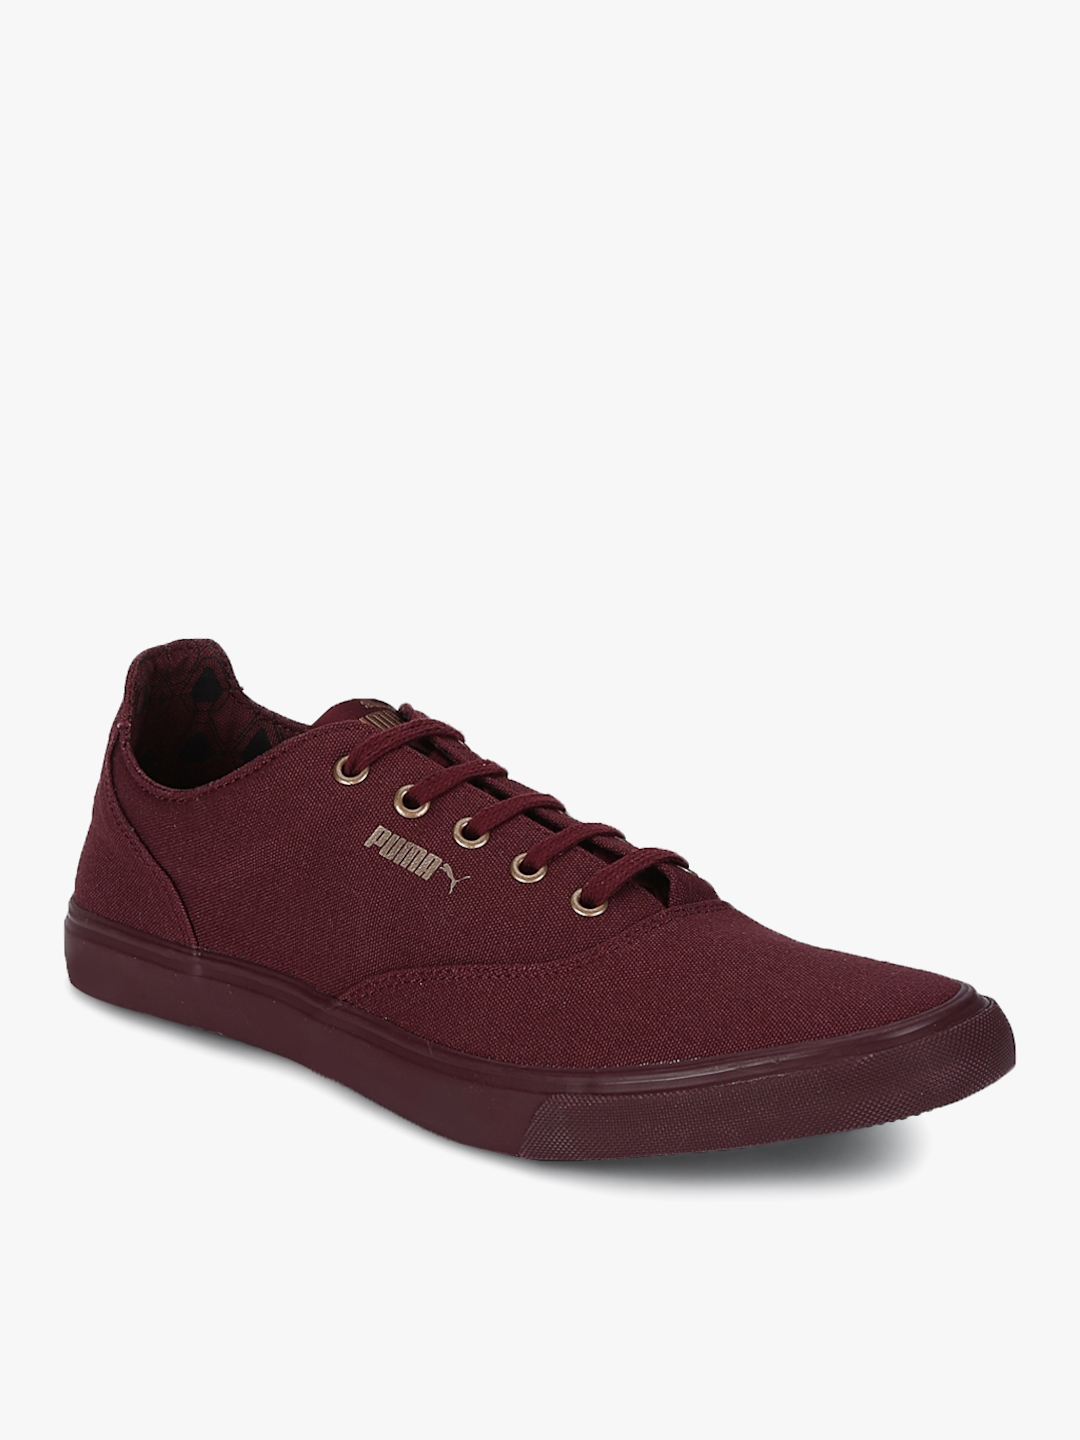 X Idp Burgundy Sneakers - Casual Shoes 